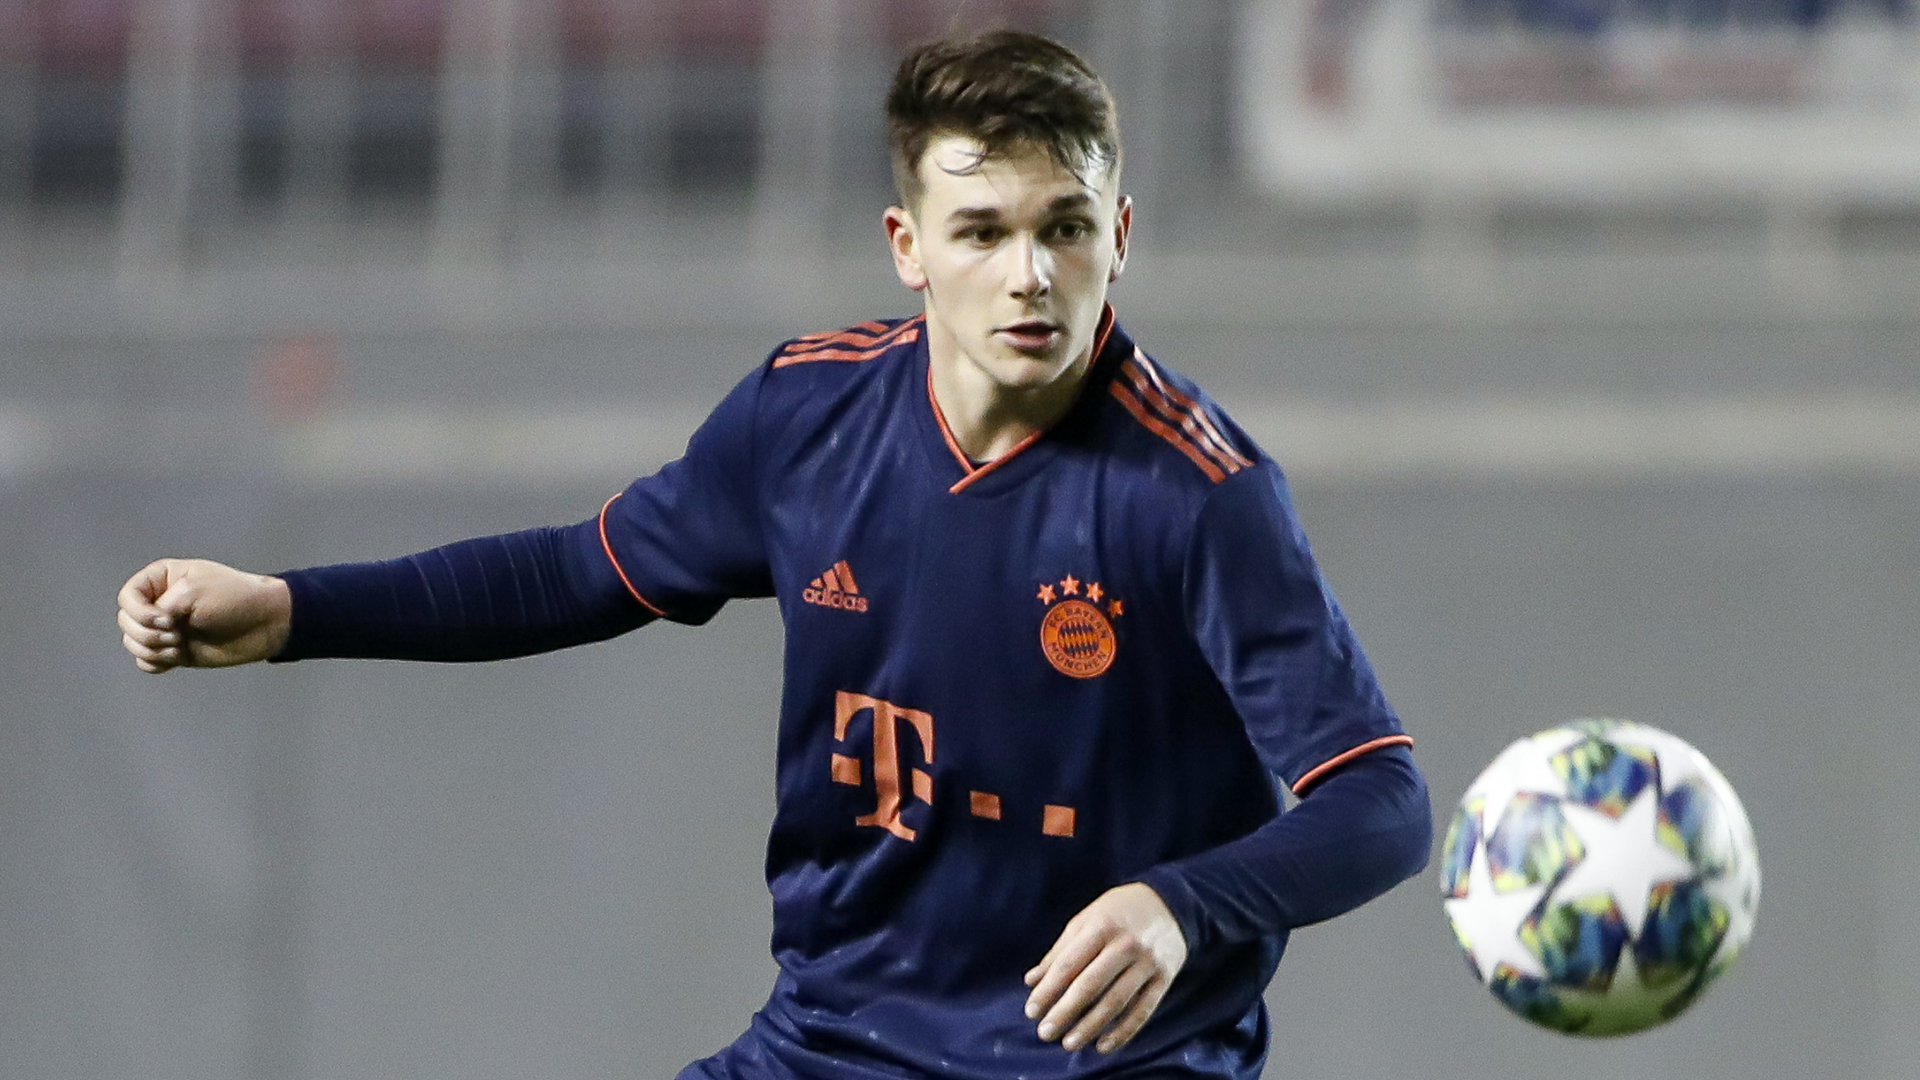 Man Utd monitoring American starlet Taylor Booth ahead of possible transfer raid for USMNT hopeful